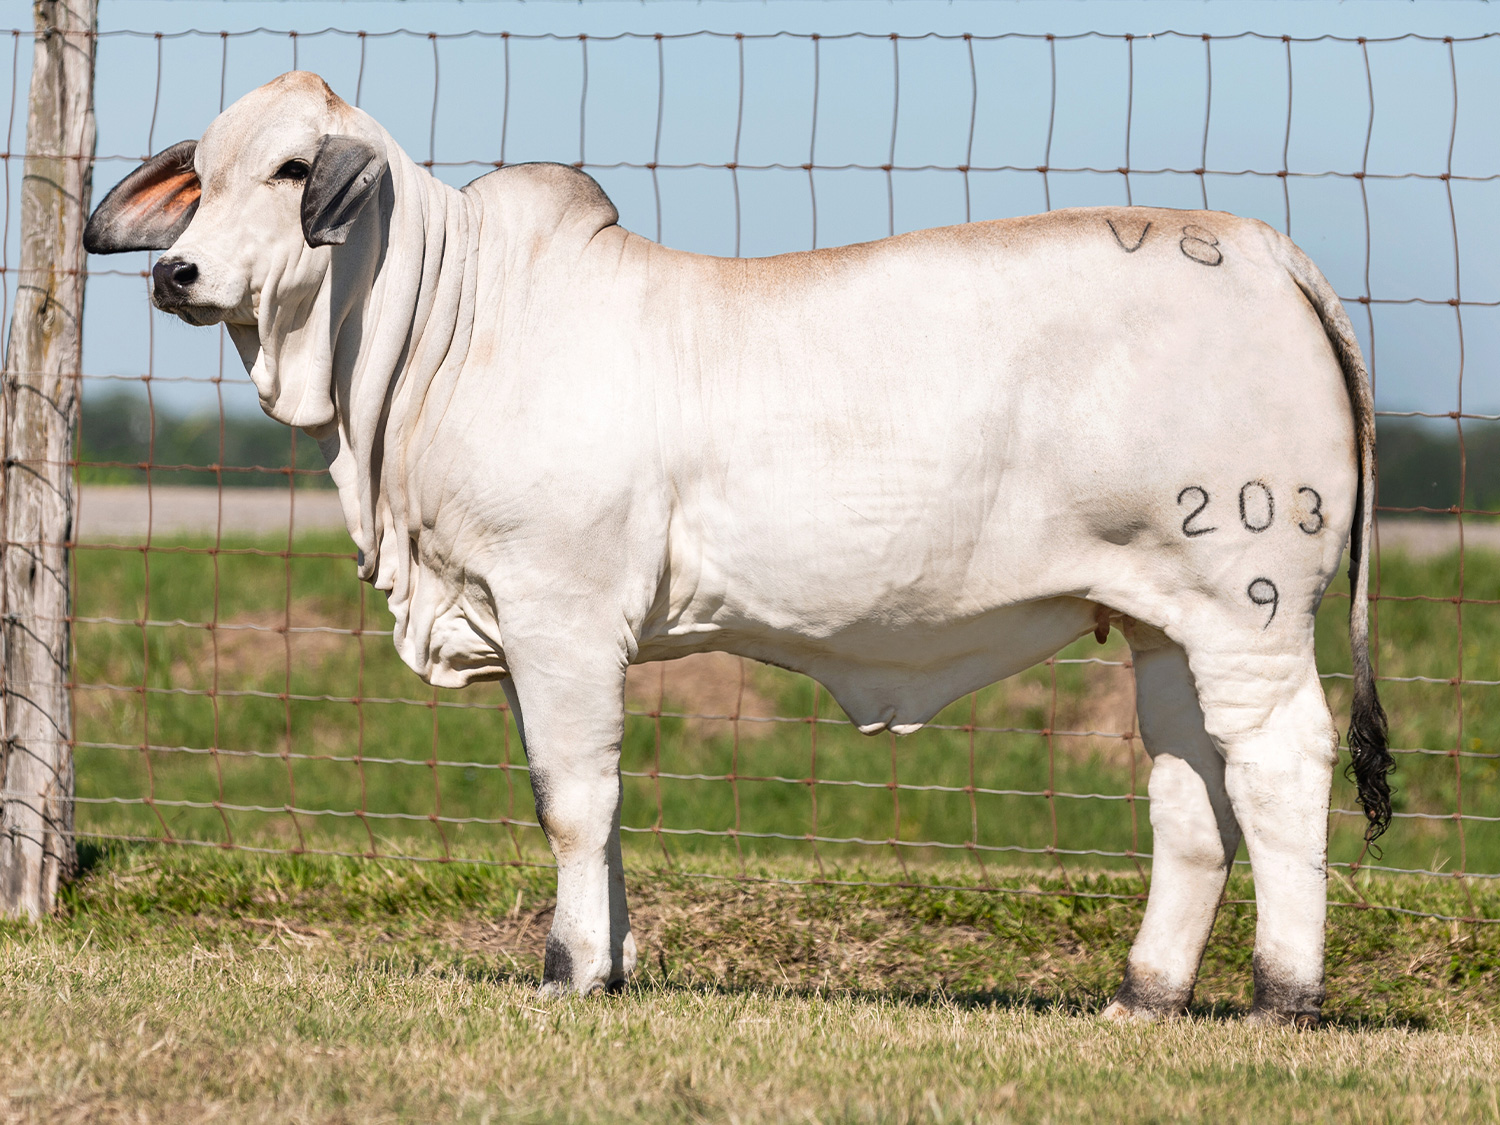 Miss V8 203/9 Dreamgirl Donor Cow